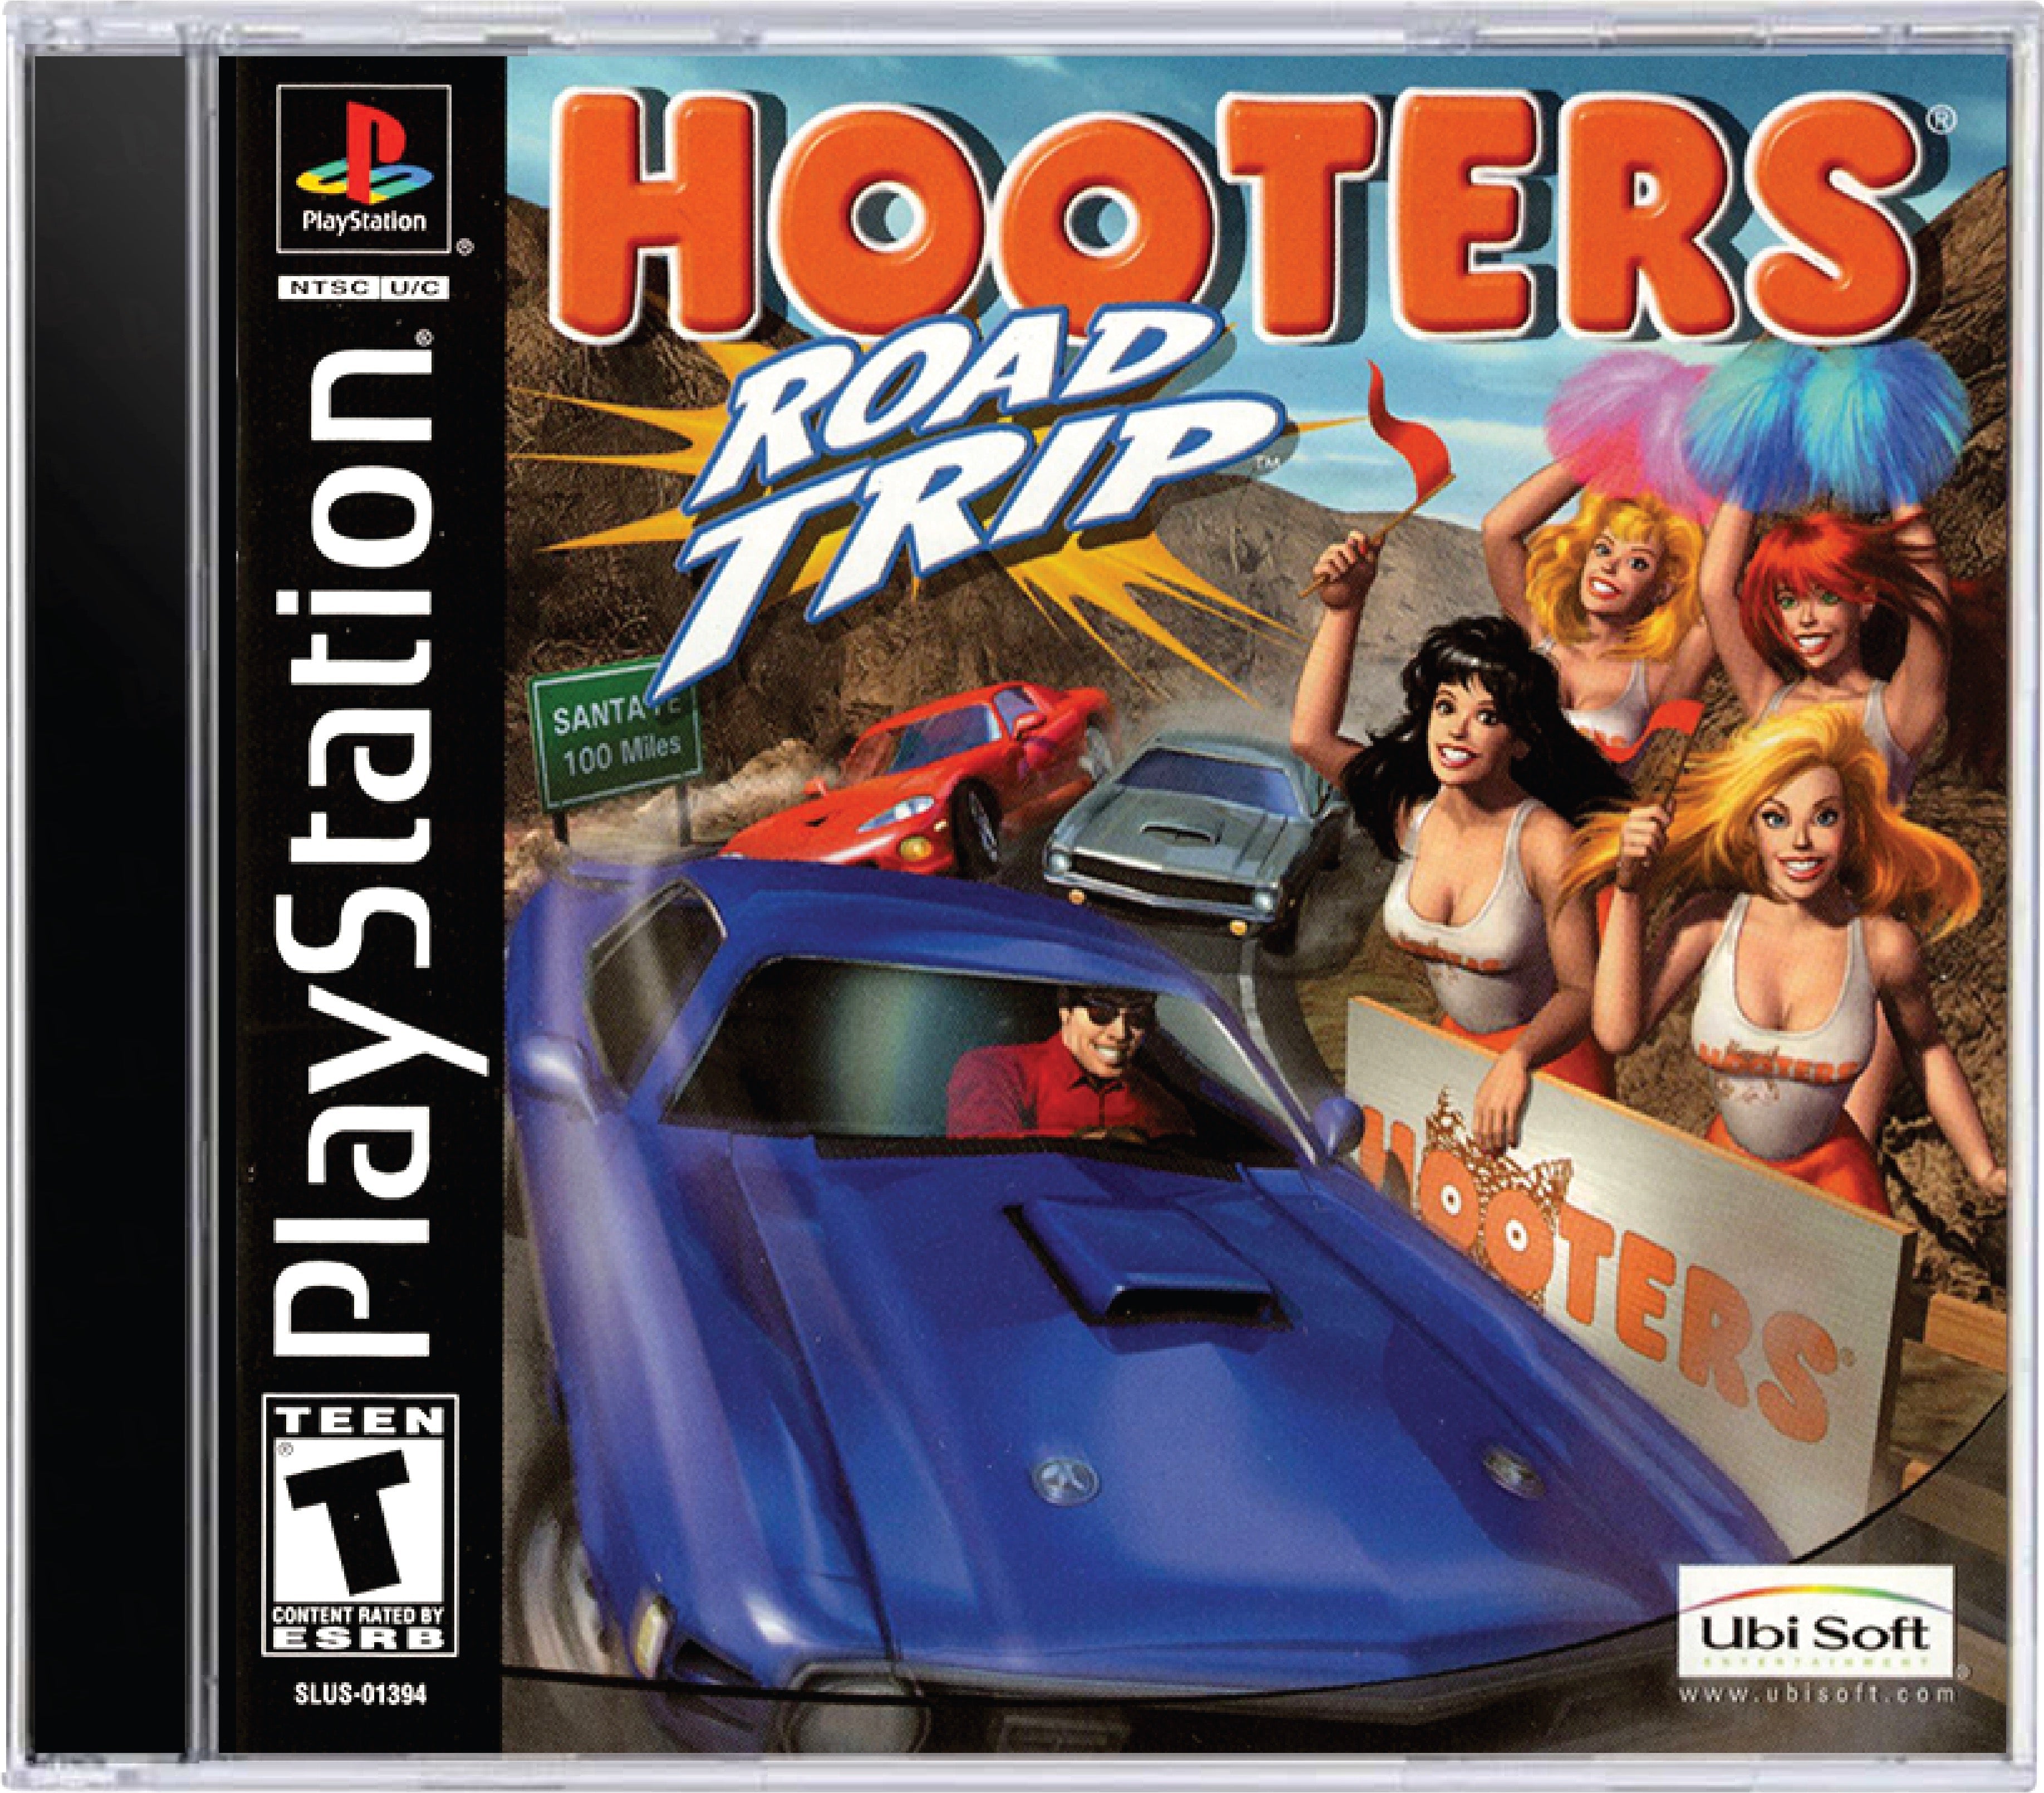 Hooters Road Trip Cover Art and Product Photo